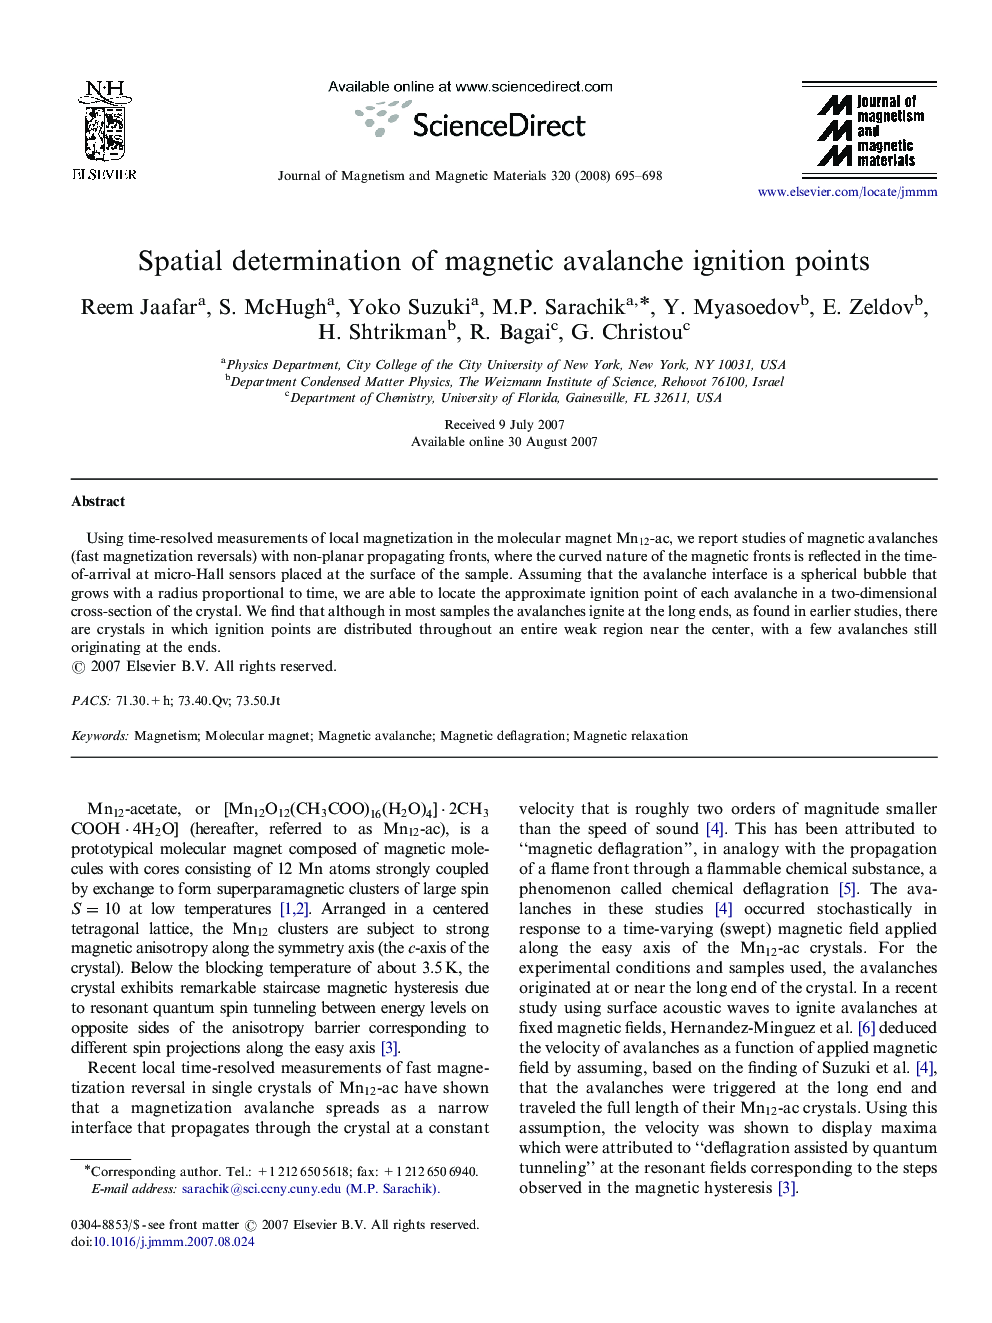 Spatial determination of magnetic avalanche ignition points